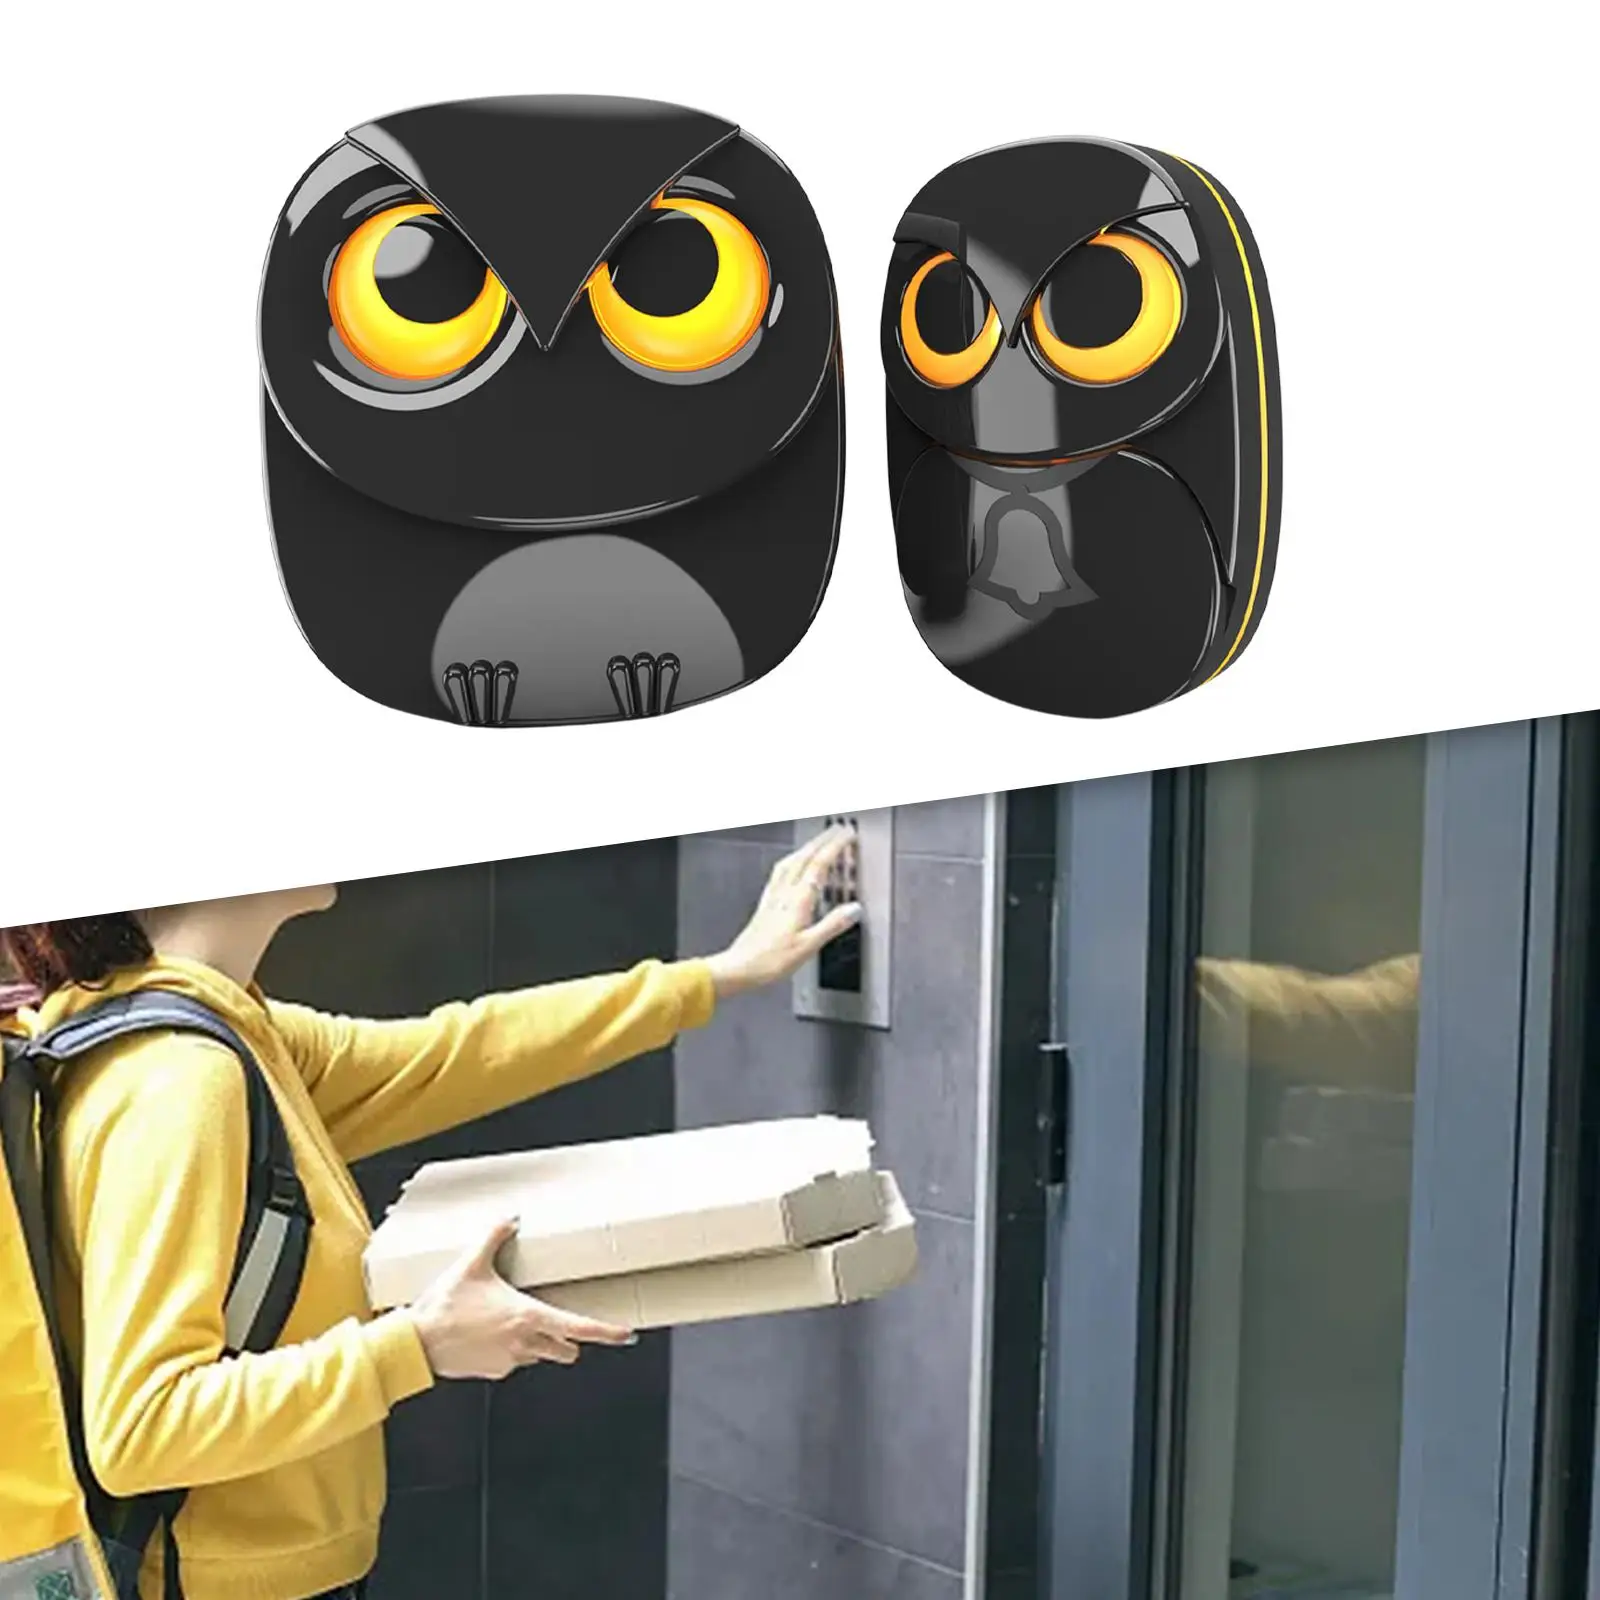 Wireless Driveway Security Alarm Creative Simple to Use Devices Multipurpose Owl Shape for Gate Shed Home Outside US Plug